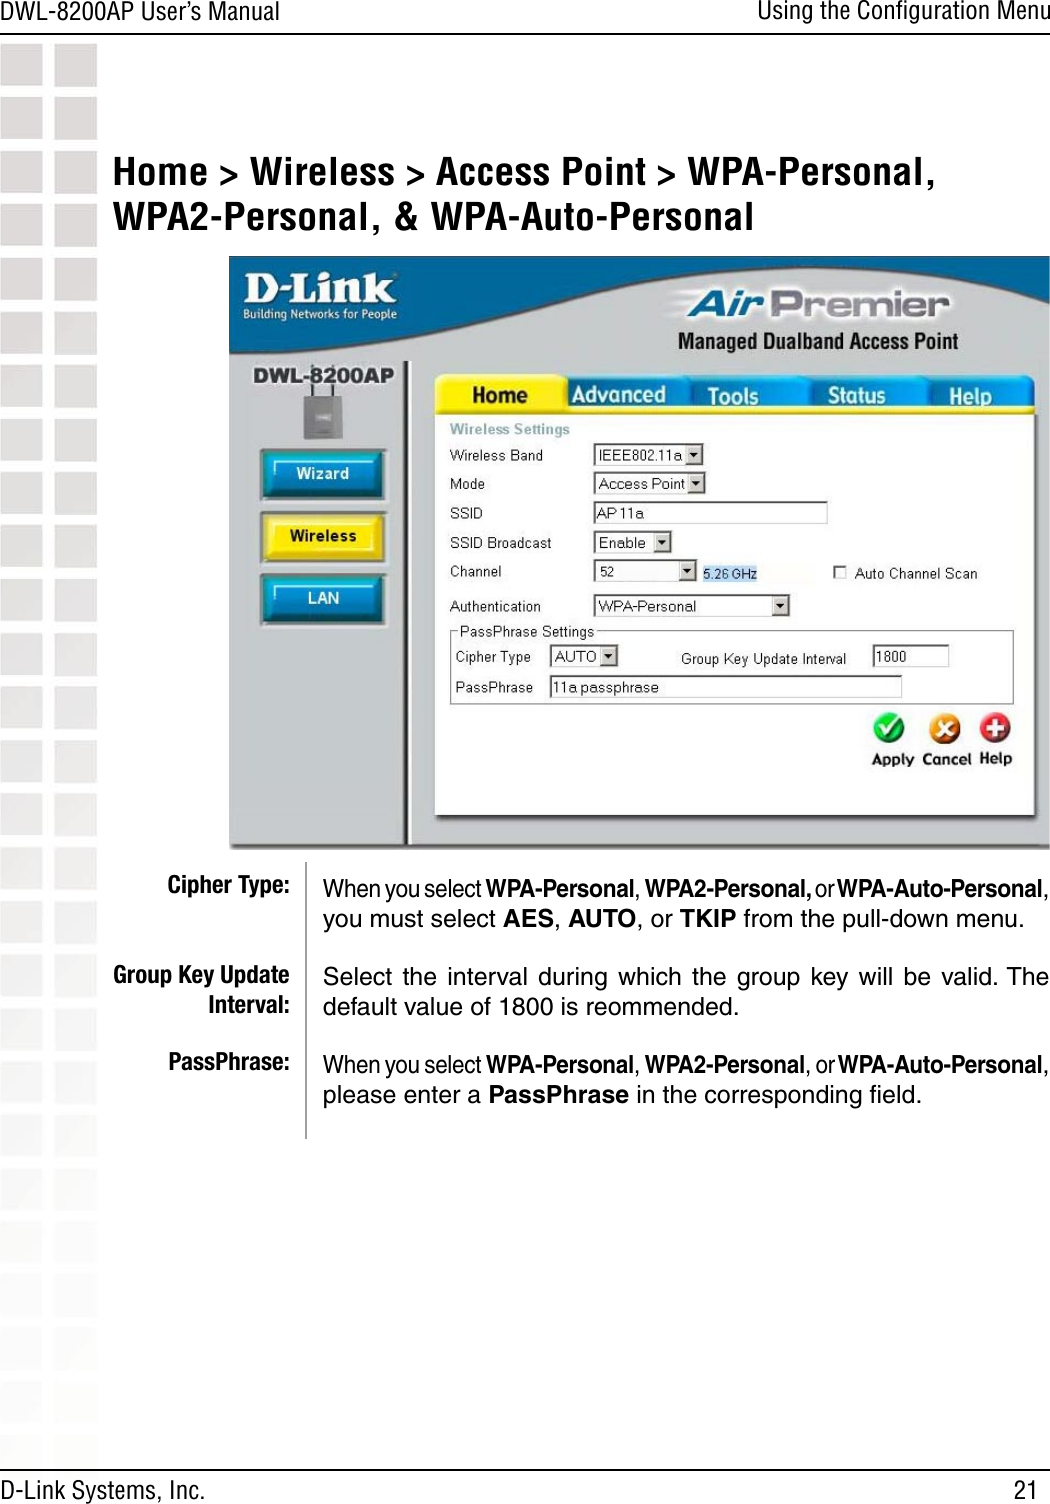 21DWL-8200AP User’s ManualD-Link Systems, Inc.Using the Conﬁguration MenuWhen you select WPA-Personal, WPA2-Personal, or WPA-Auto-Personal, you must select AES, AUTO, or TKIP from the pull-down menu.Select  the  interval during  which  the  group  key will  be valid. The default value of 1800 is reommended.When you select WPA-Personal, WPA2-Personal, or WPA-Auto-Personal, please enter a PassPhrase in the corresponding ﬁeld.Cipher Type:Group Key Update Interval:PassPhrase:Home &gt; Wireless &gt; Access Point &gt; WPA-Personal, WPA2-Personal, &amp; WPA-Auto-Personal